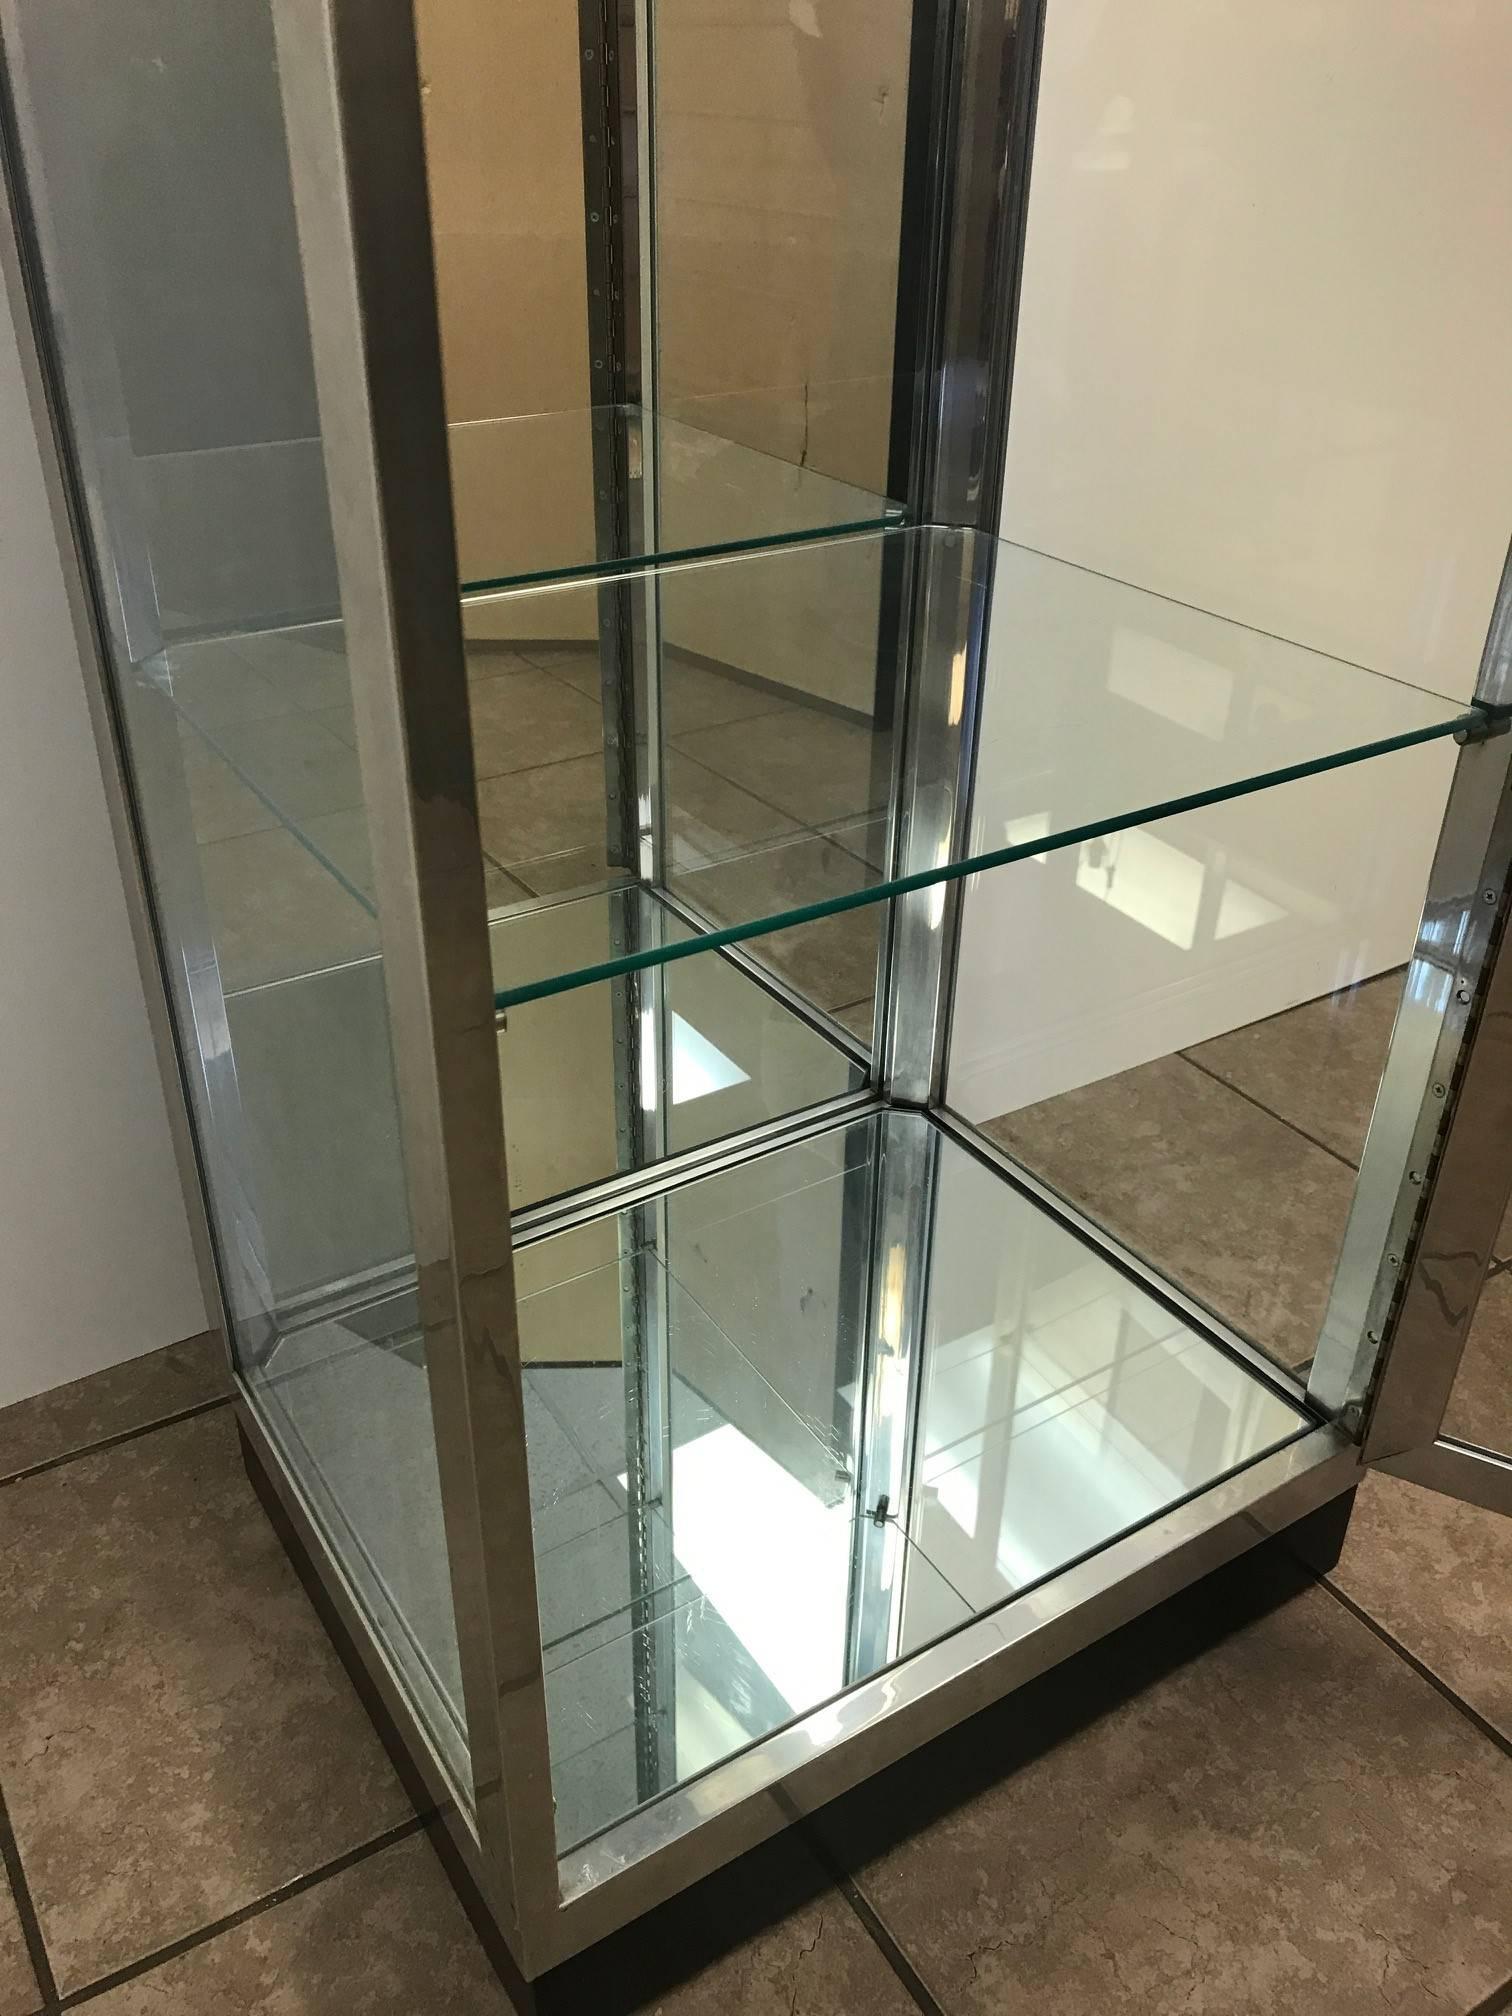 Pair of vintage aluminium and glass display cabinets. Has four glass shelves, the bottom and inside back is mirrored and also has a black lacquered wooden base. Cabinets also have a light to the inside top. Comes with the original keys to lock the